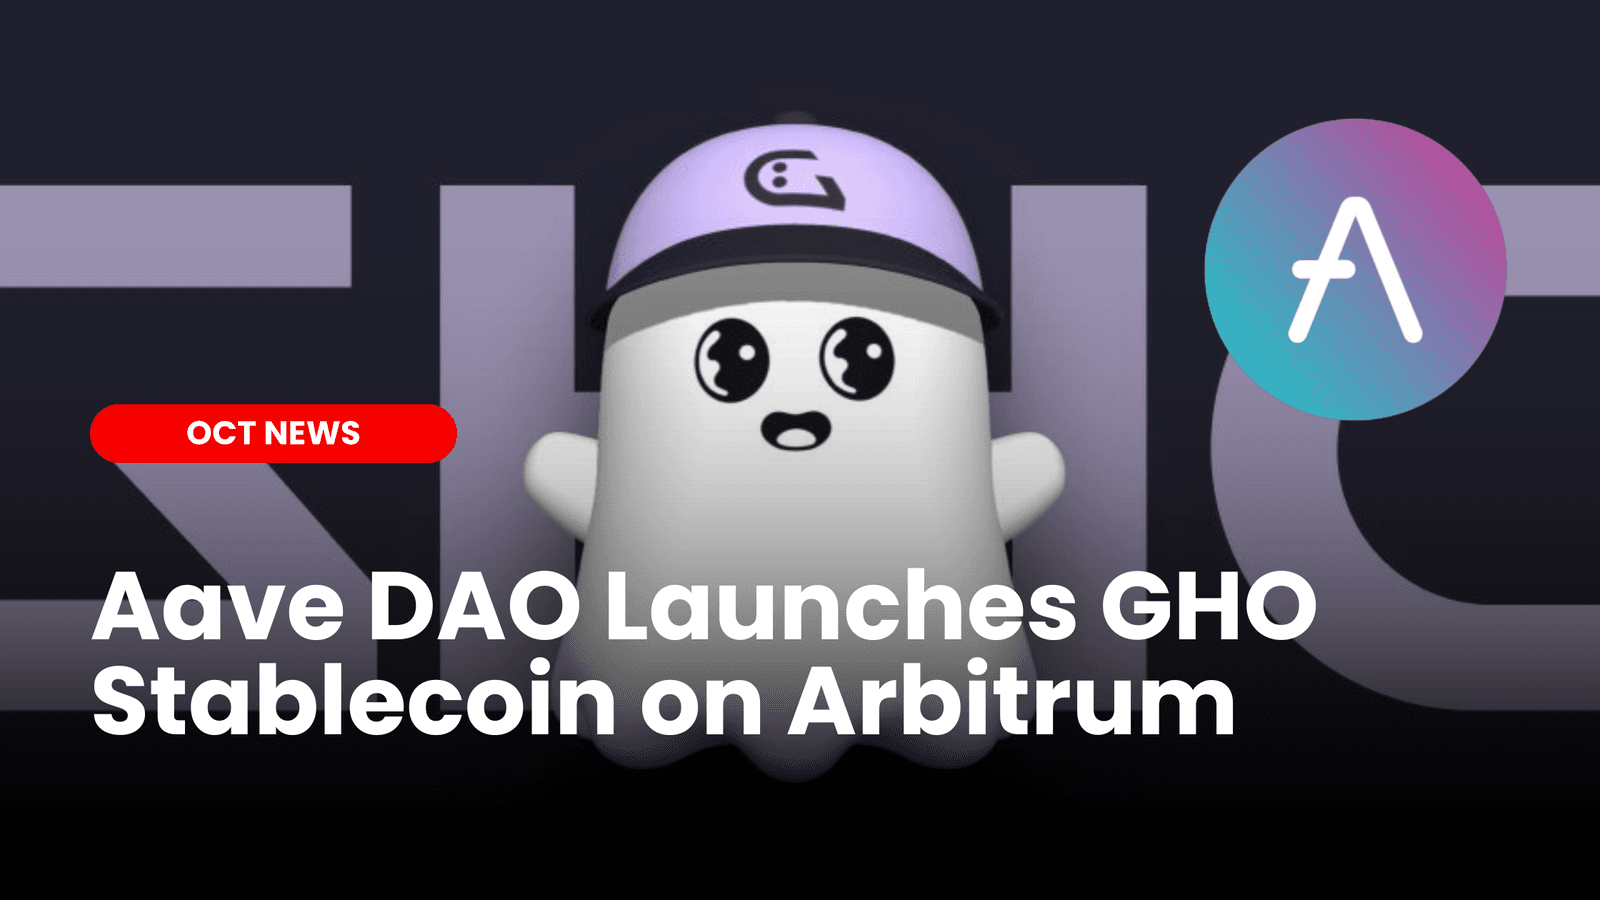 Aave DAO Introduces GHO Stablecoin